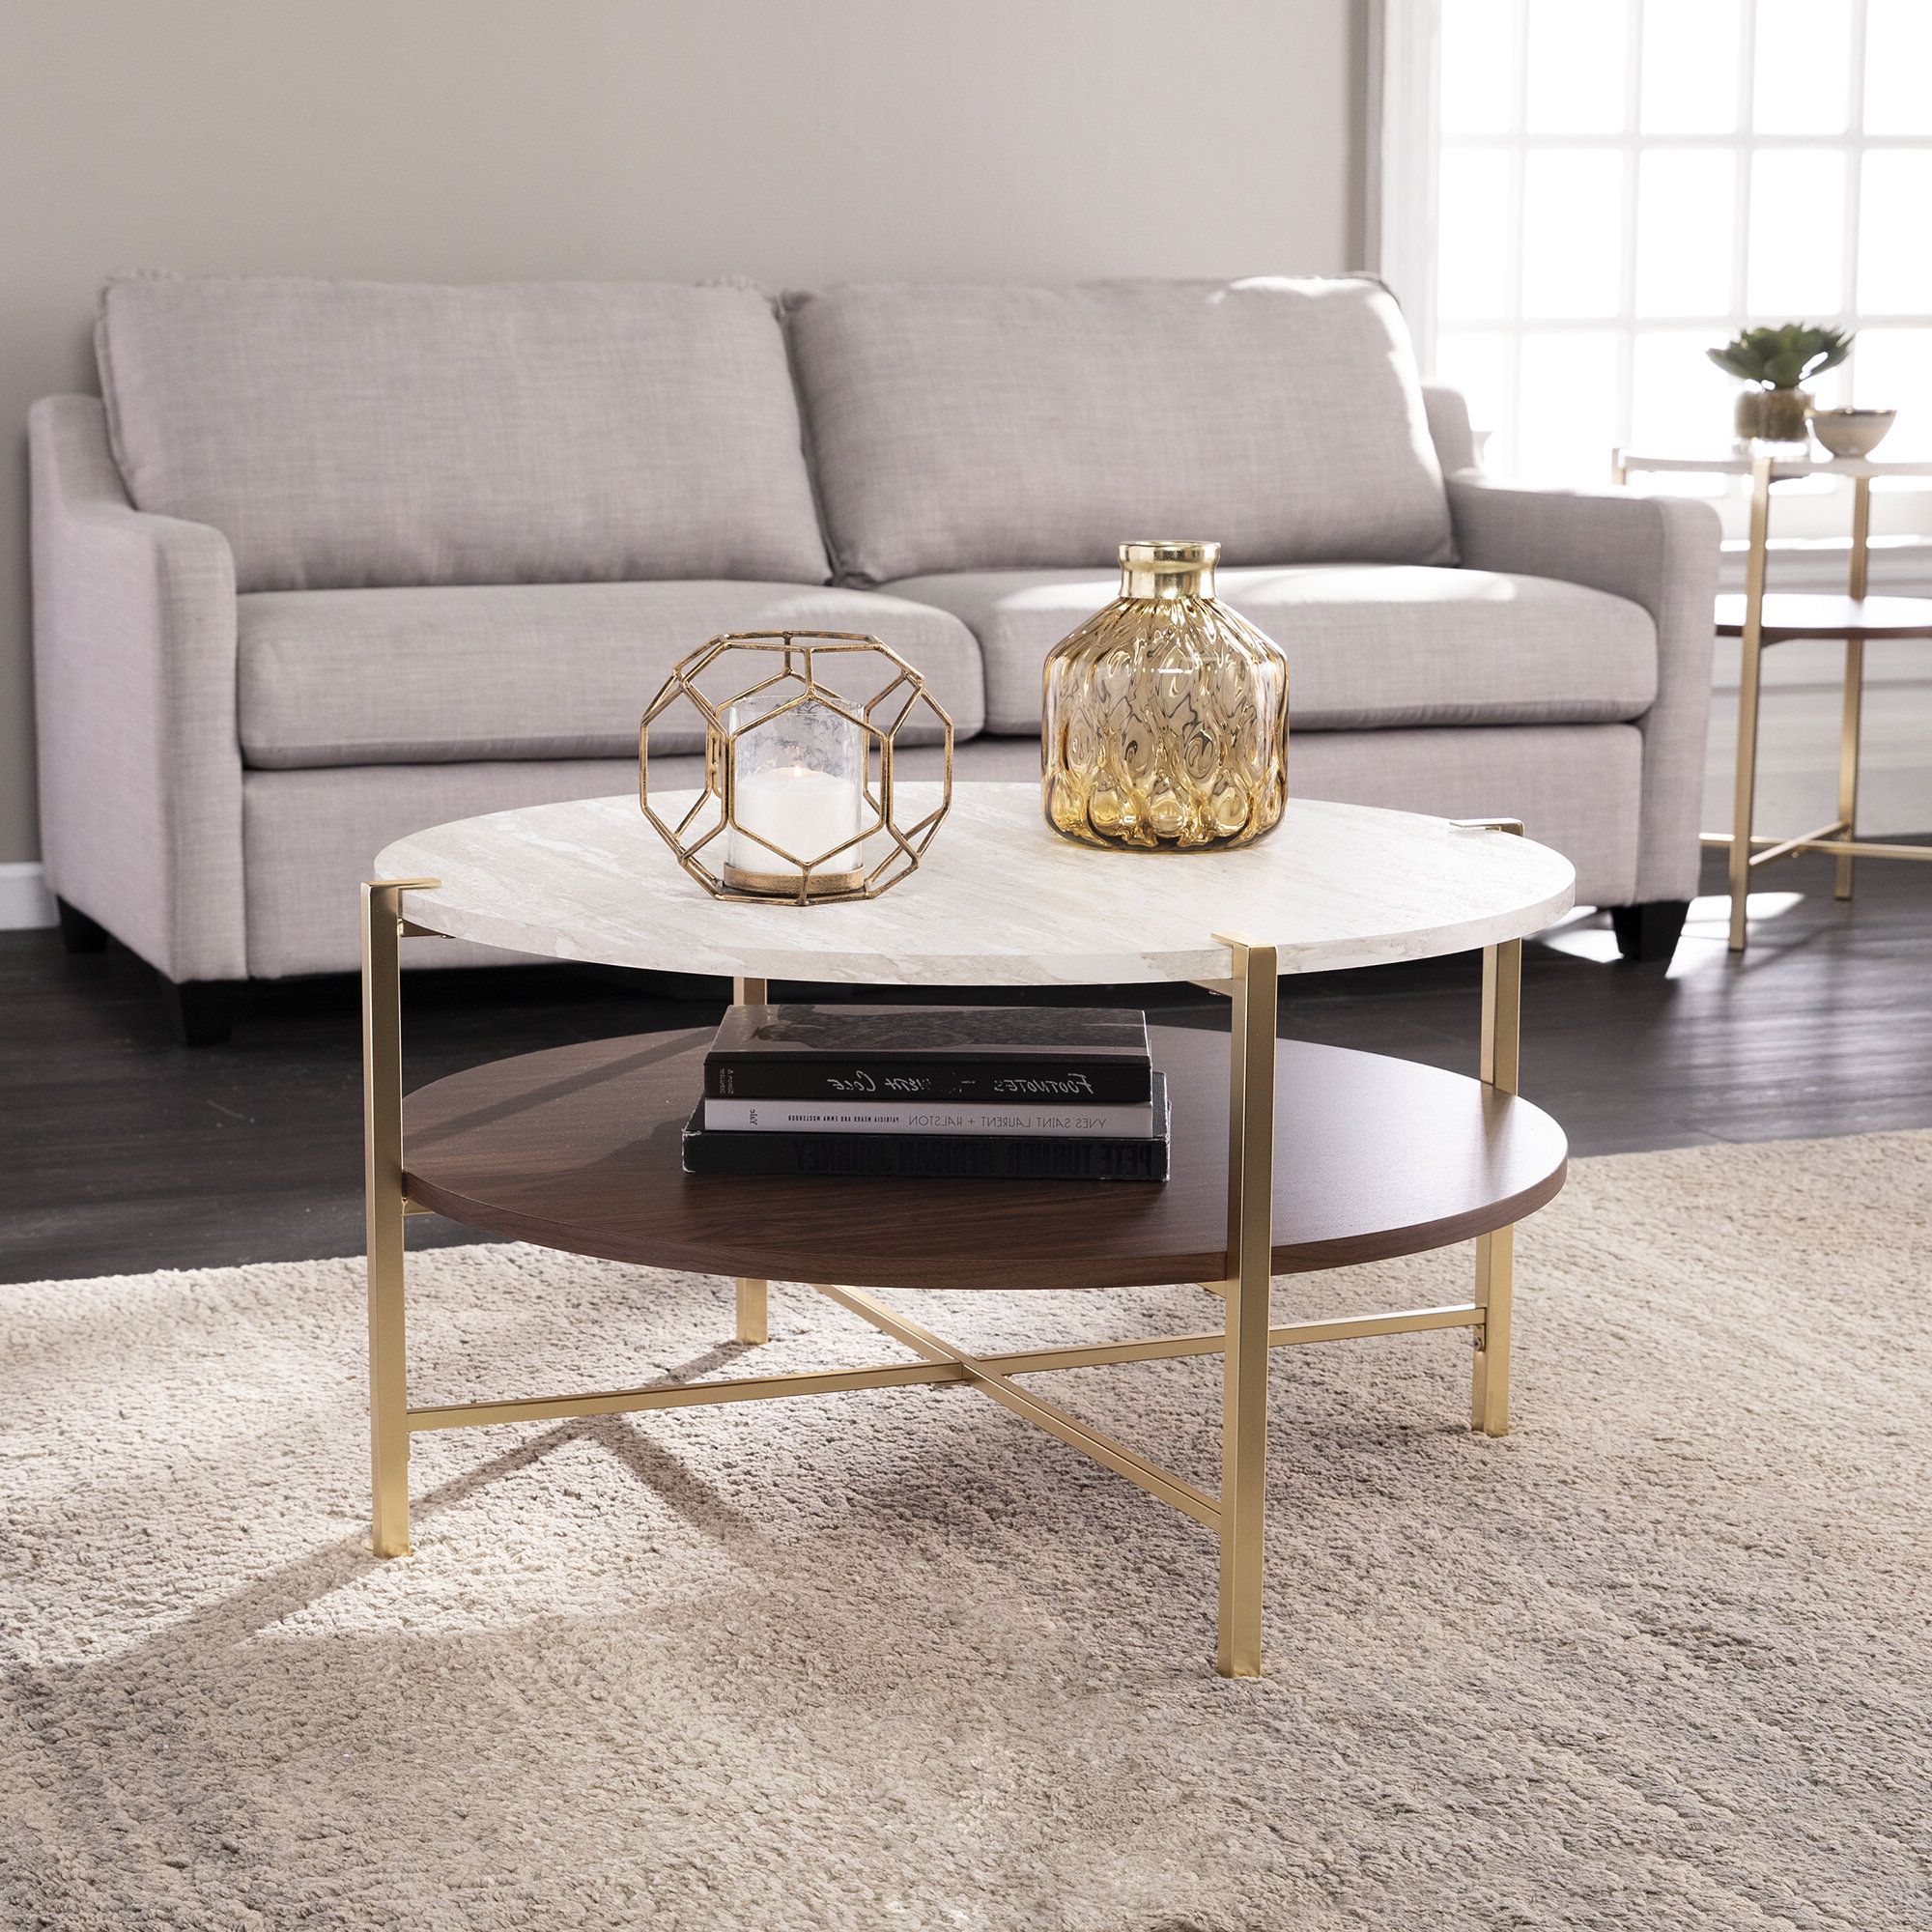 Wayfair For Most Popular Open Shelf Coffee Tables (View 16 of 20)